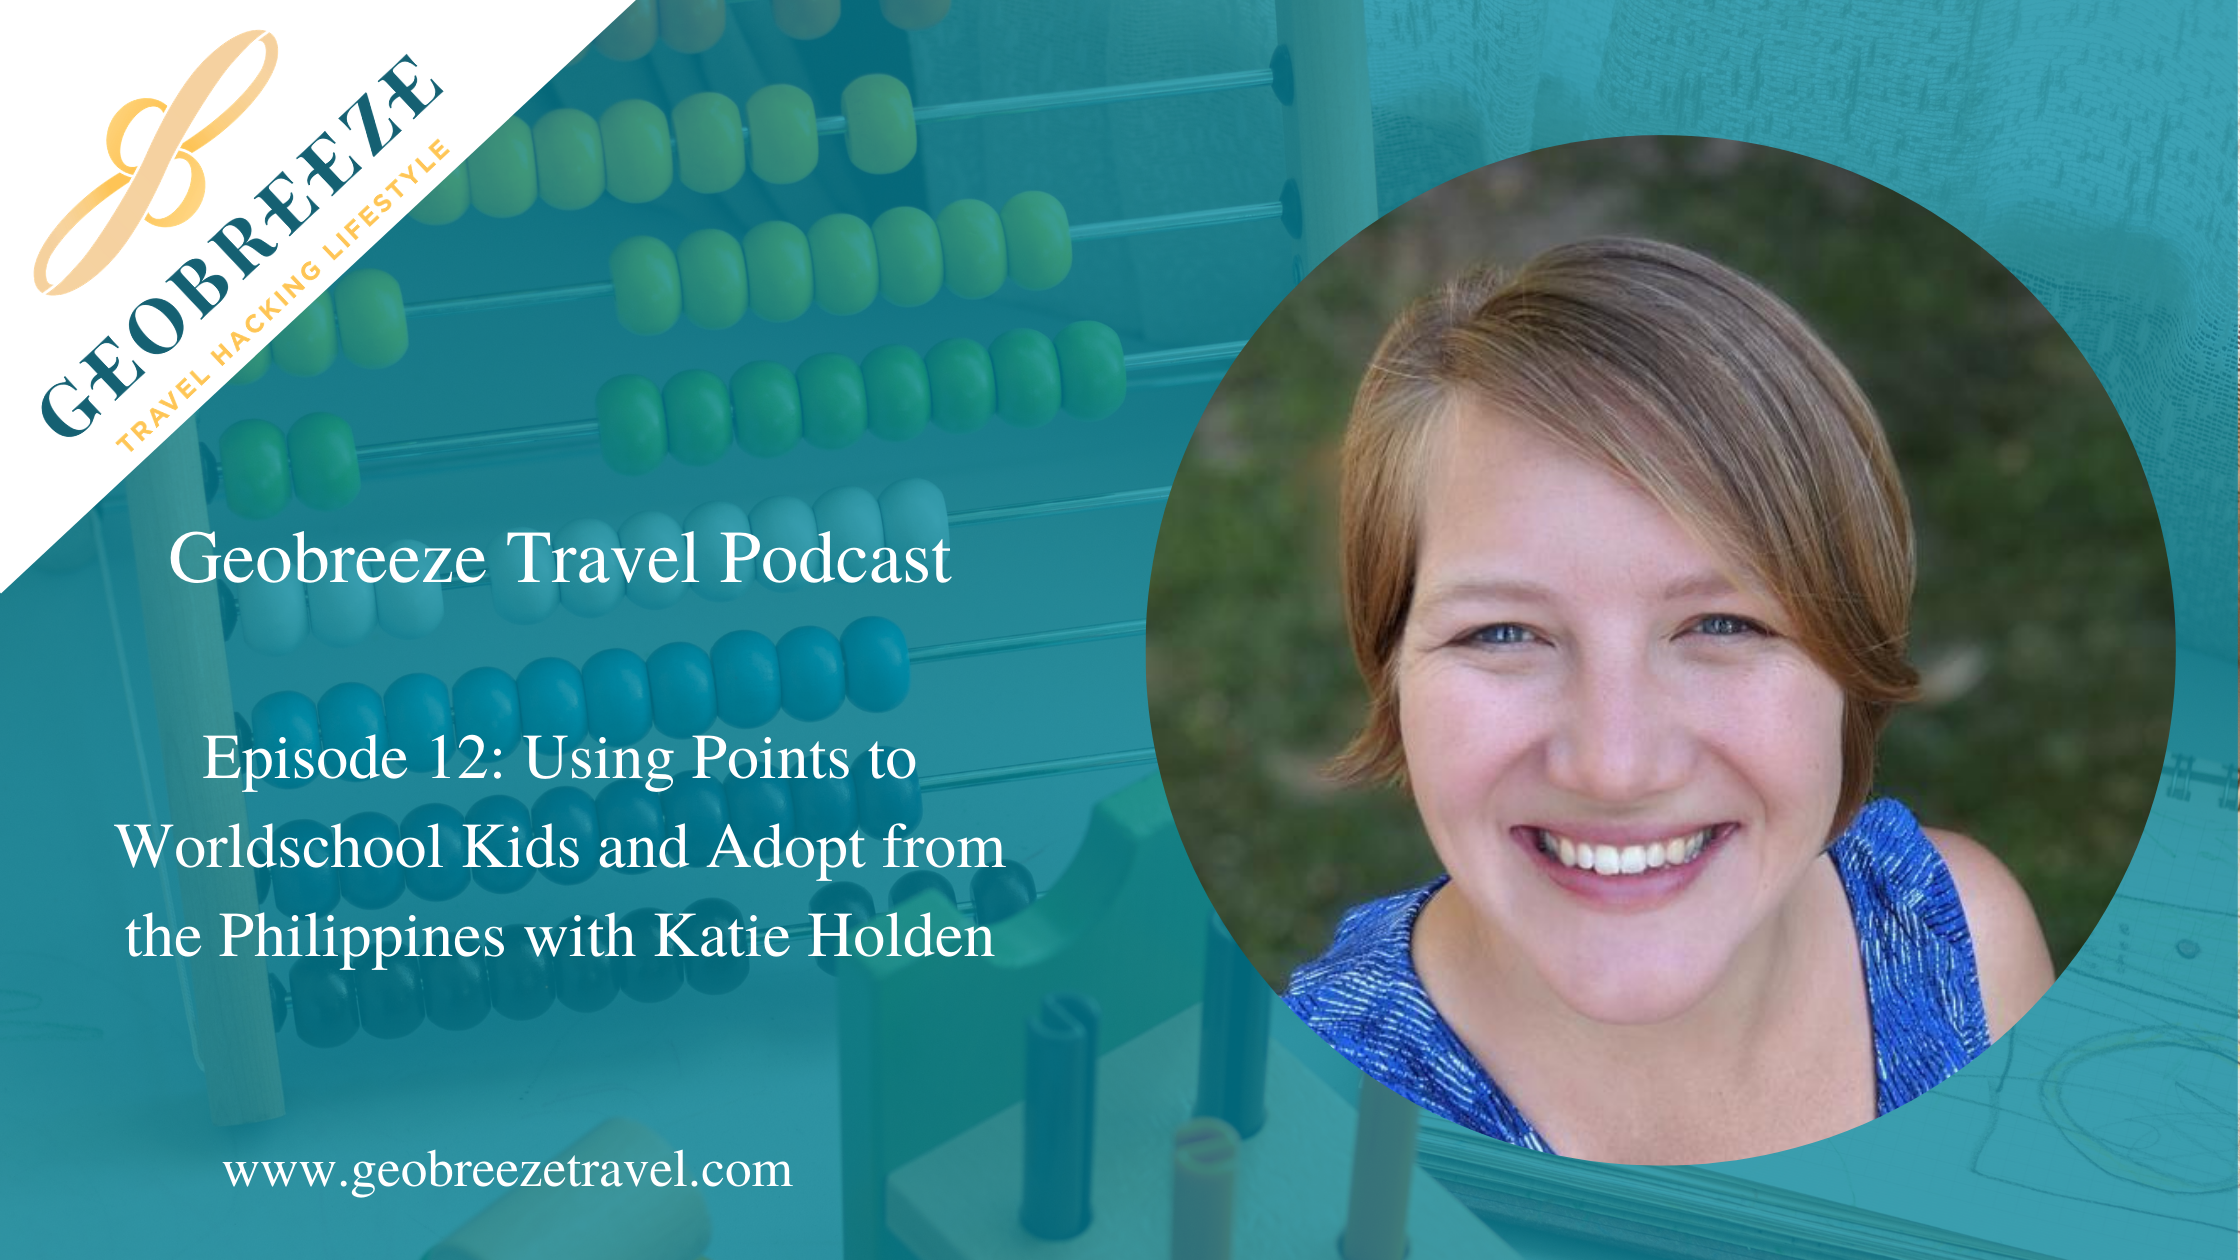 Episode 12: Using Points to Worldschool Kids and Adopt from the Philippines with Katie Holden